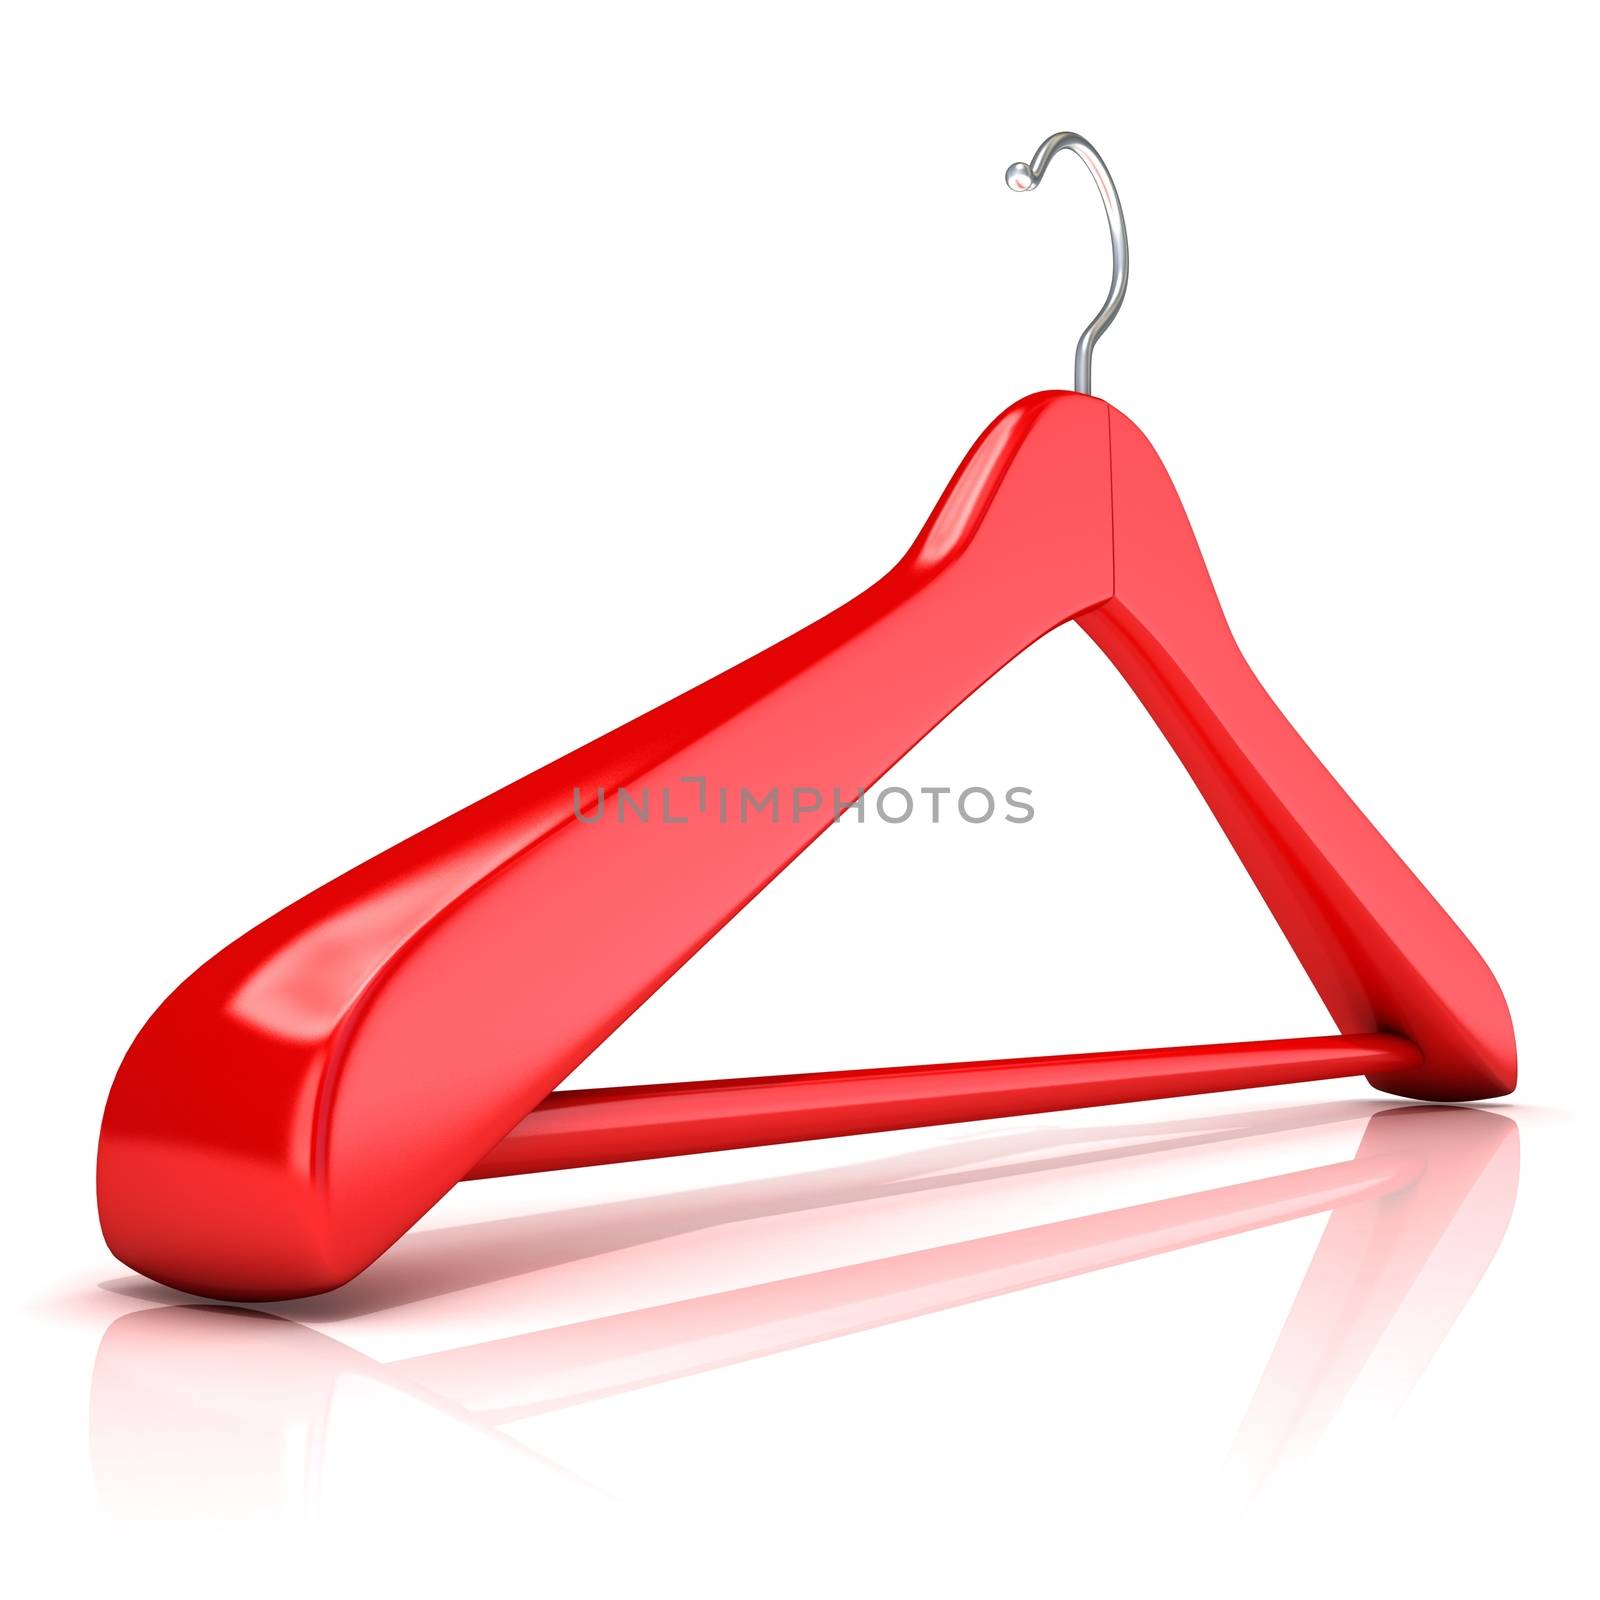 Red clothes hangers, 3D render isolated on white background. Side view